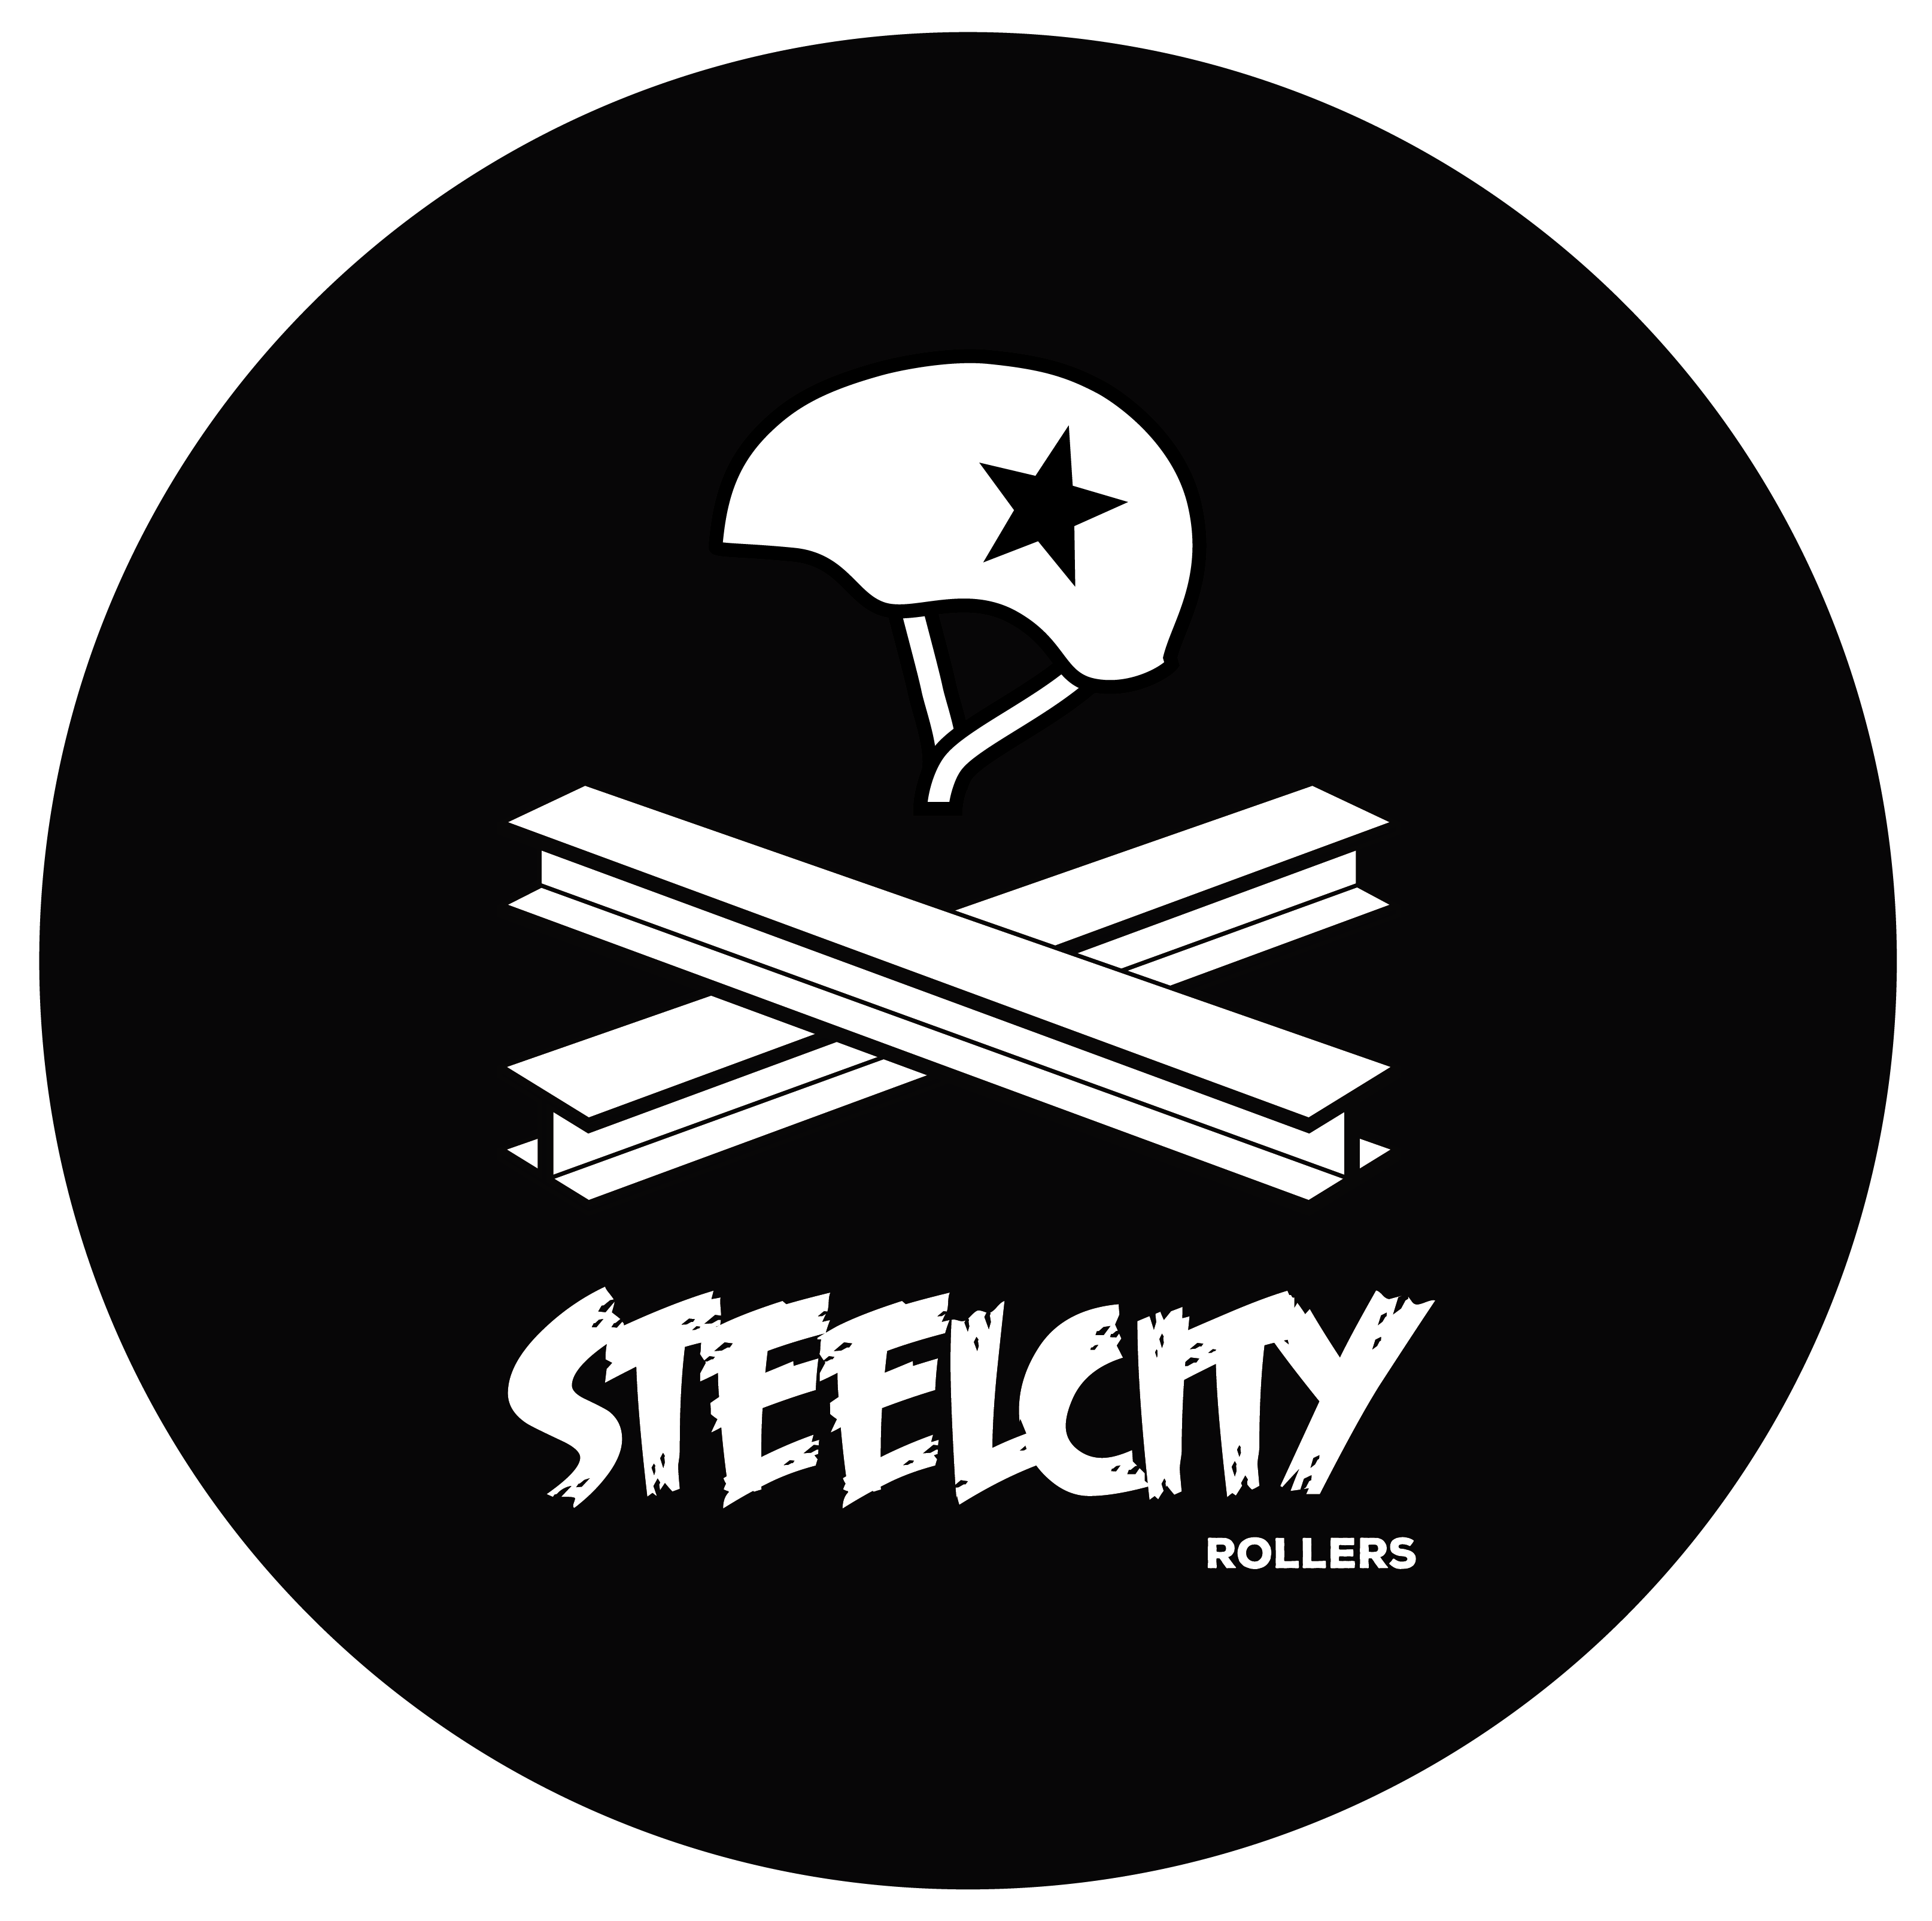 Steelcity Rollers